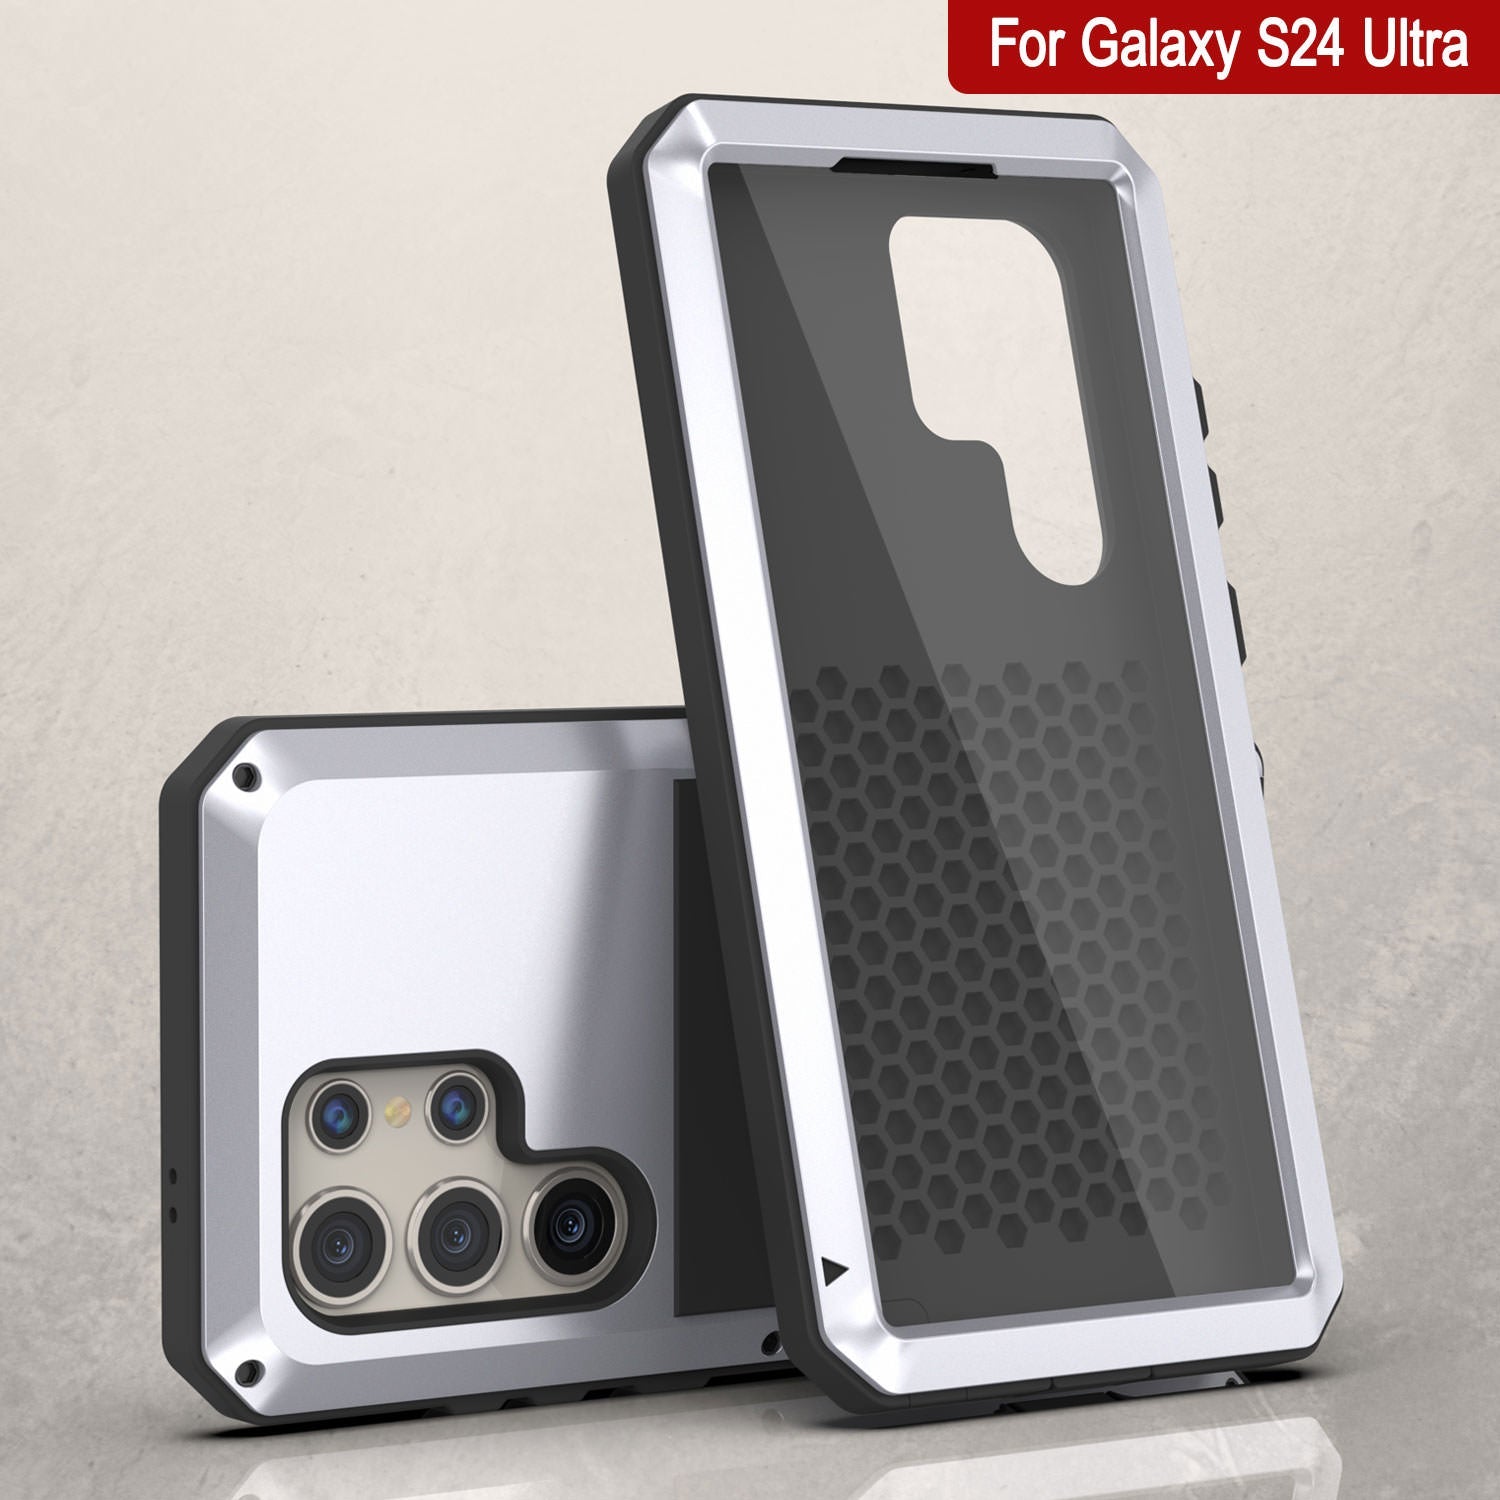 Galaxy S24 Ultra Metal Case, Heavy Duty Military Grade Armor Cover [shock proof] Full Body Hard [White]